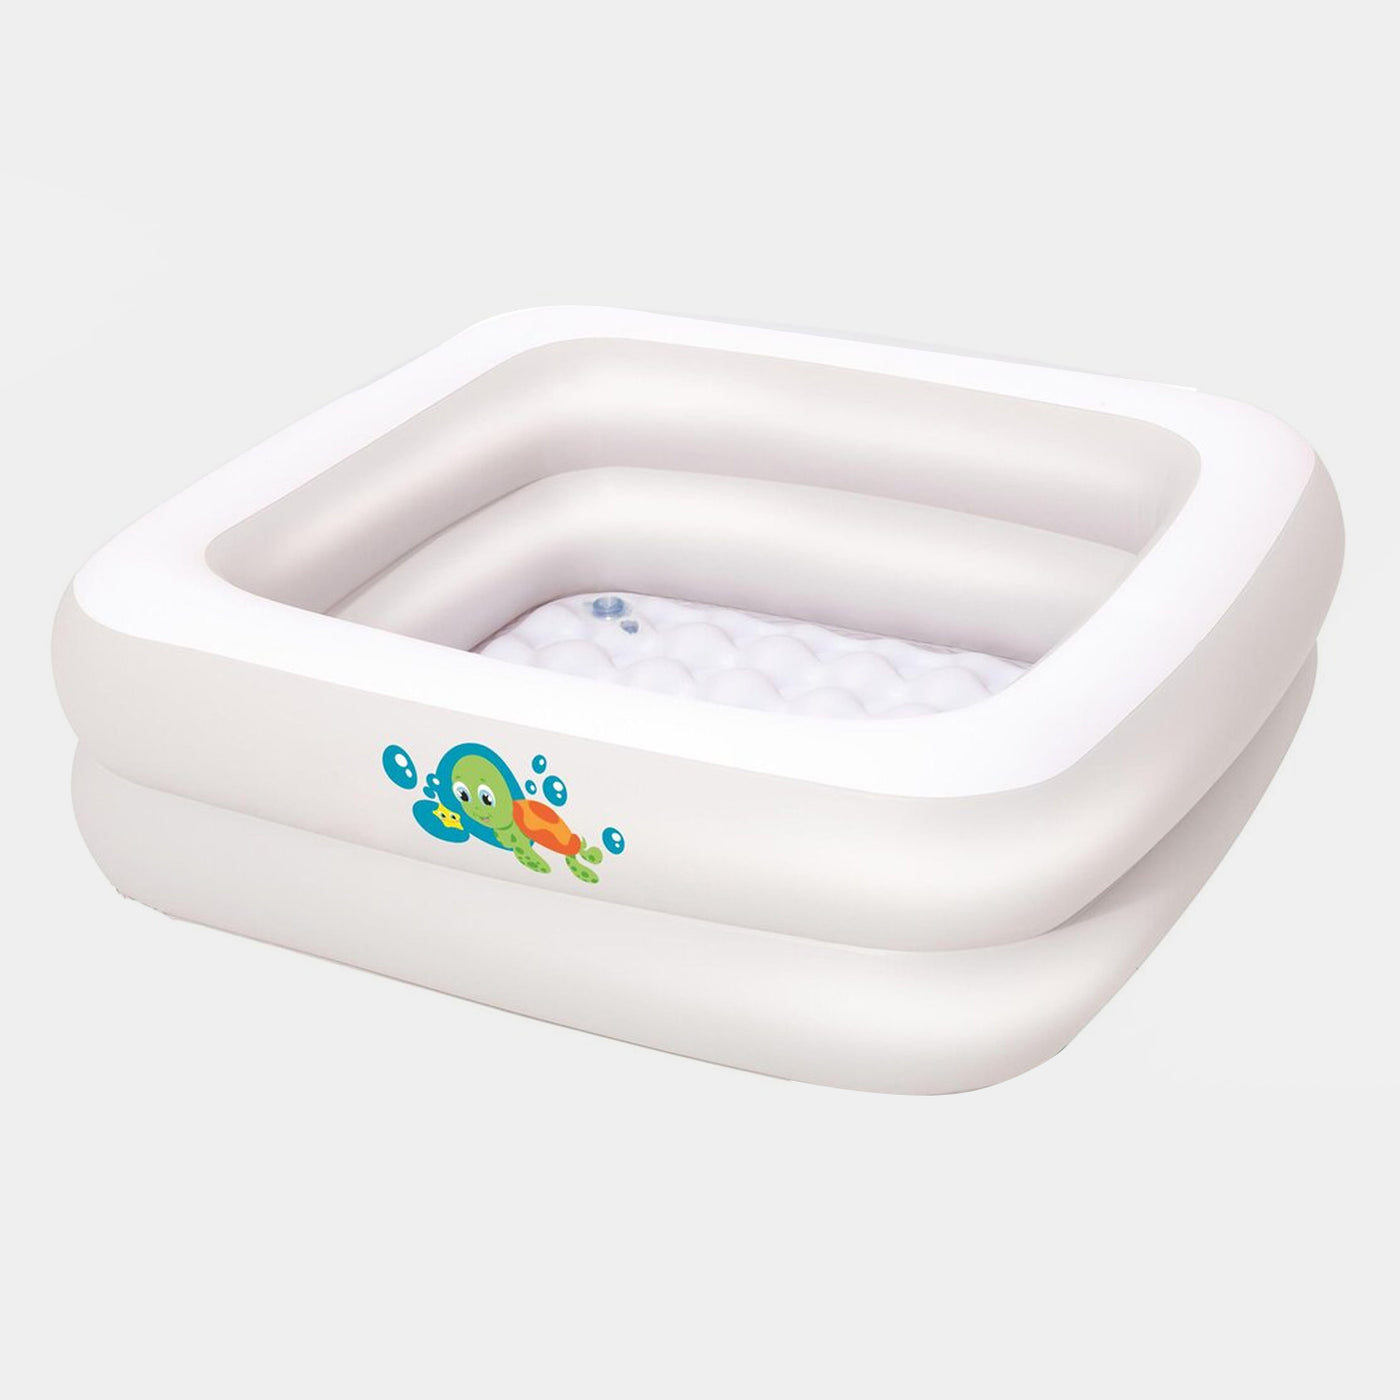 Bestway Double-Ring Inflatable Baby Bath Tub (51116)